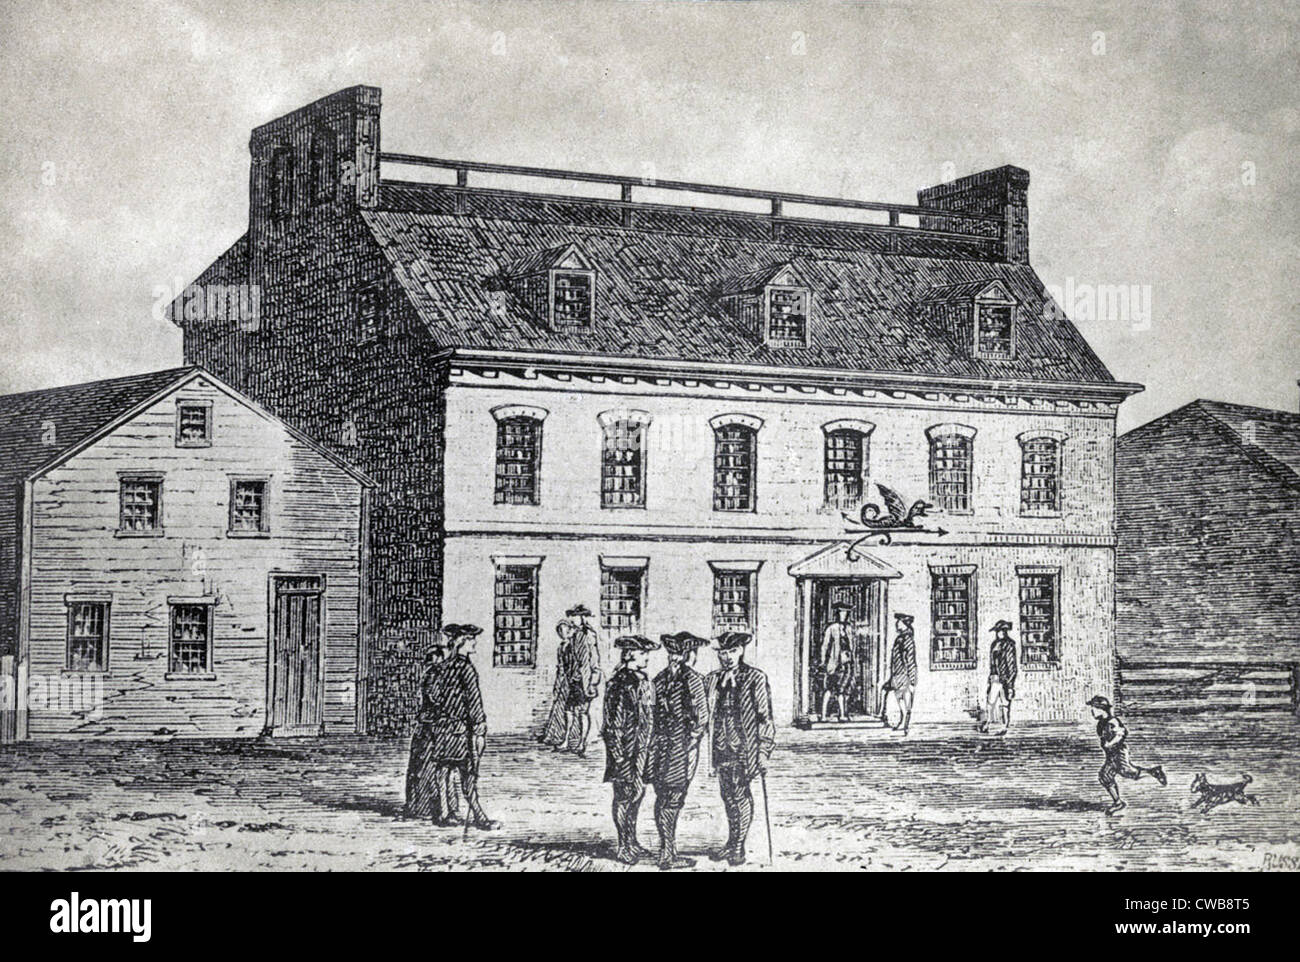 The American Revolution.  'Green Dragon Tavern: Where we met to Plan the Consignment of a few Shiploads of Tea, Dec 16 1773,' Stock Photo